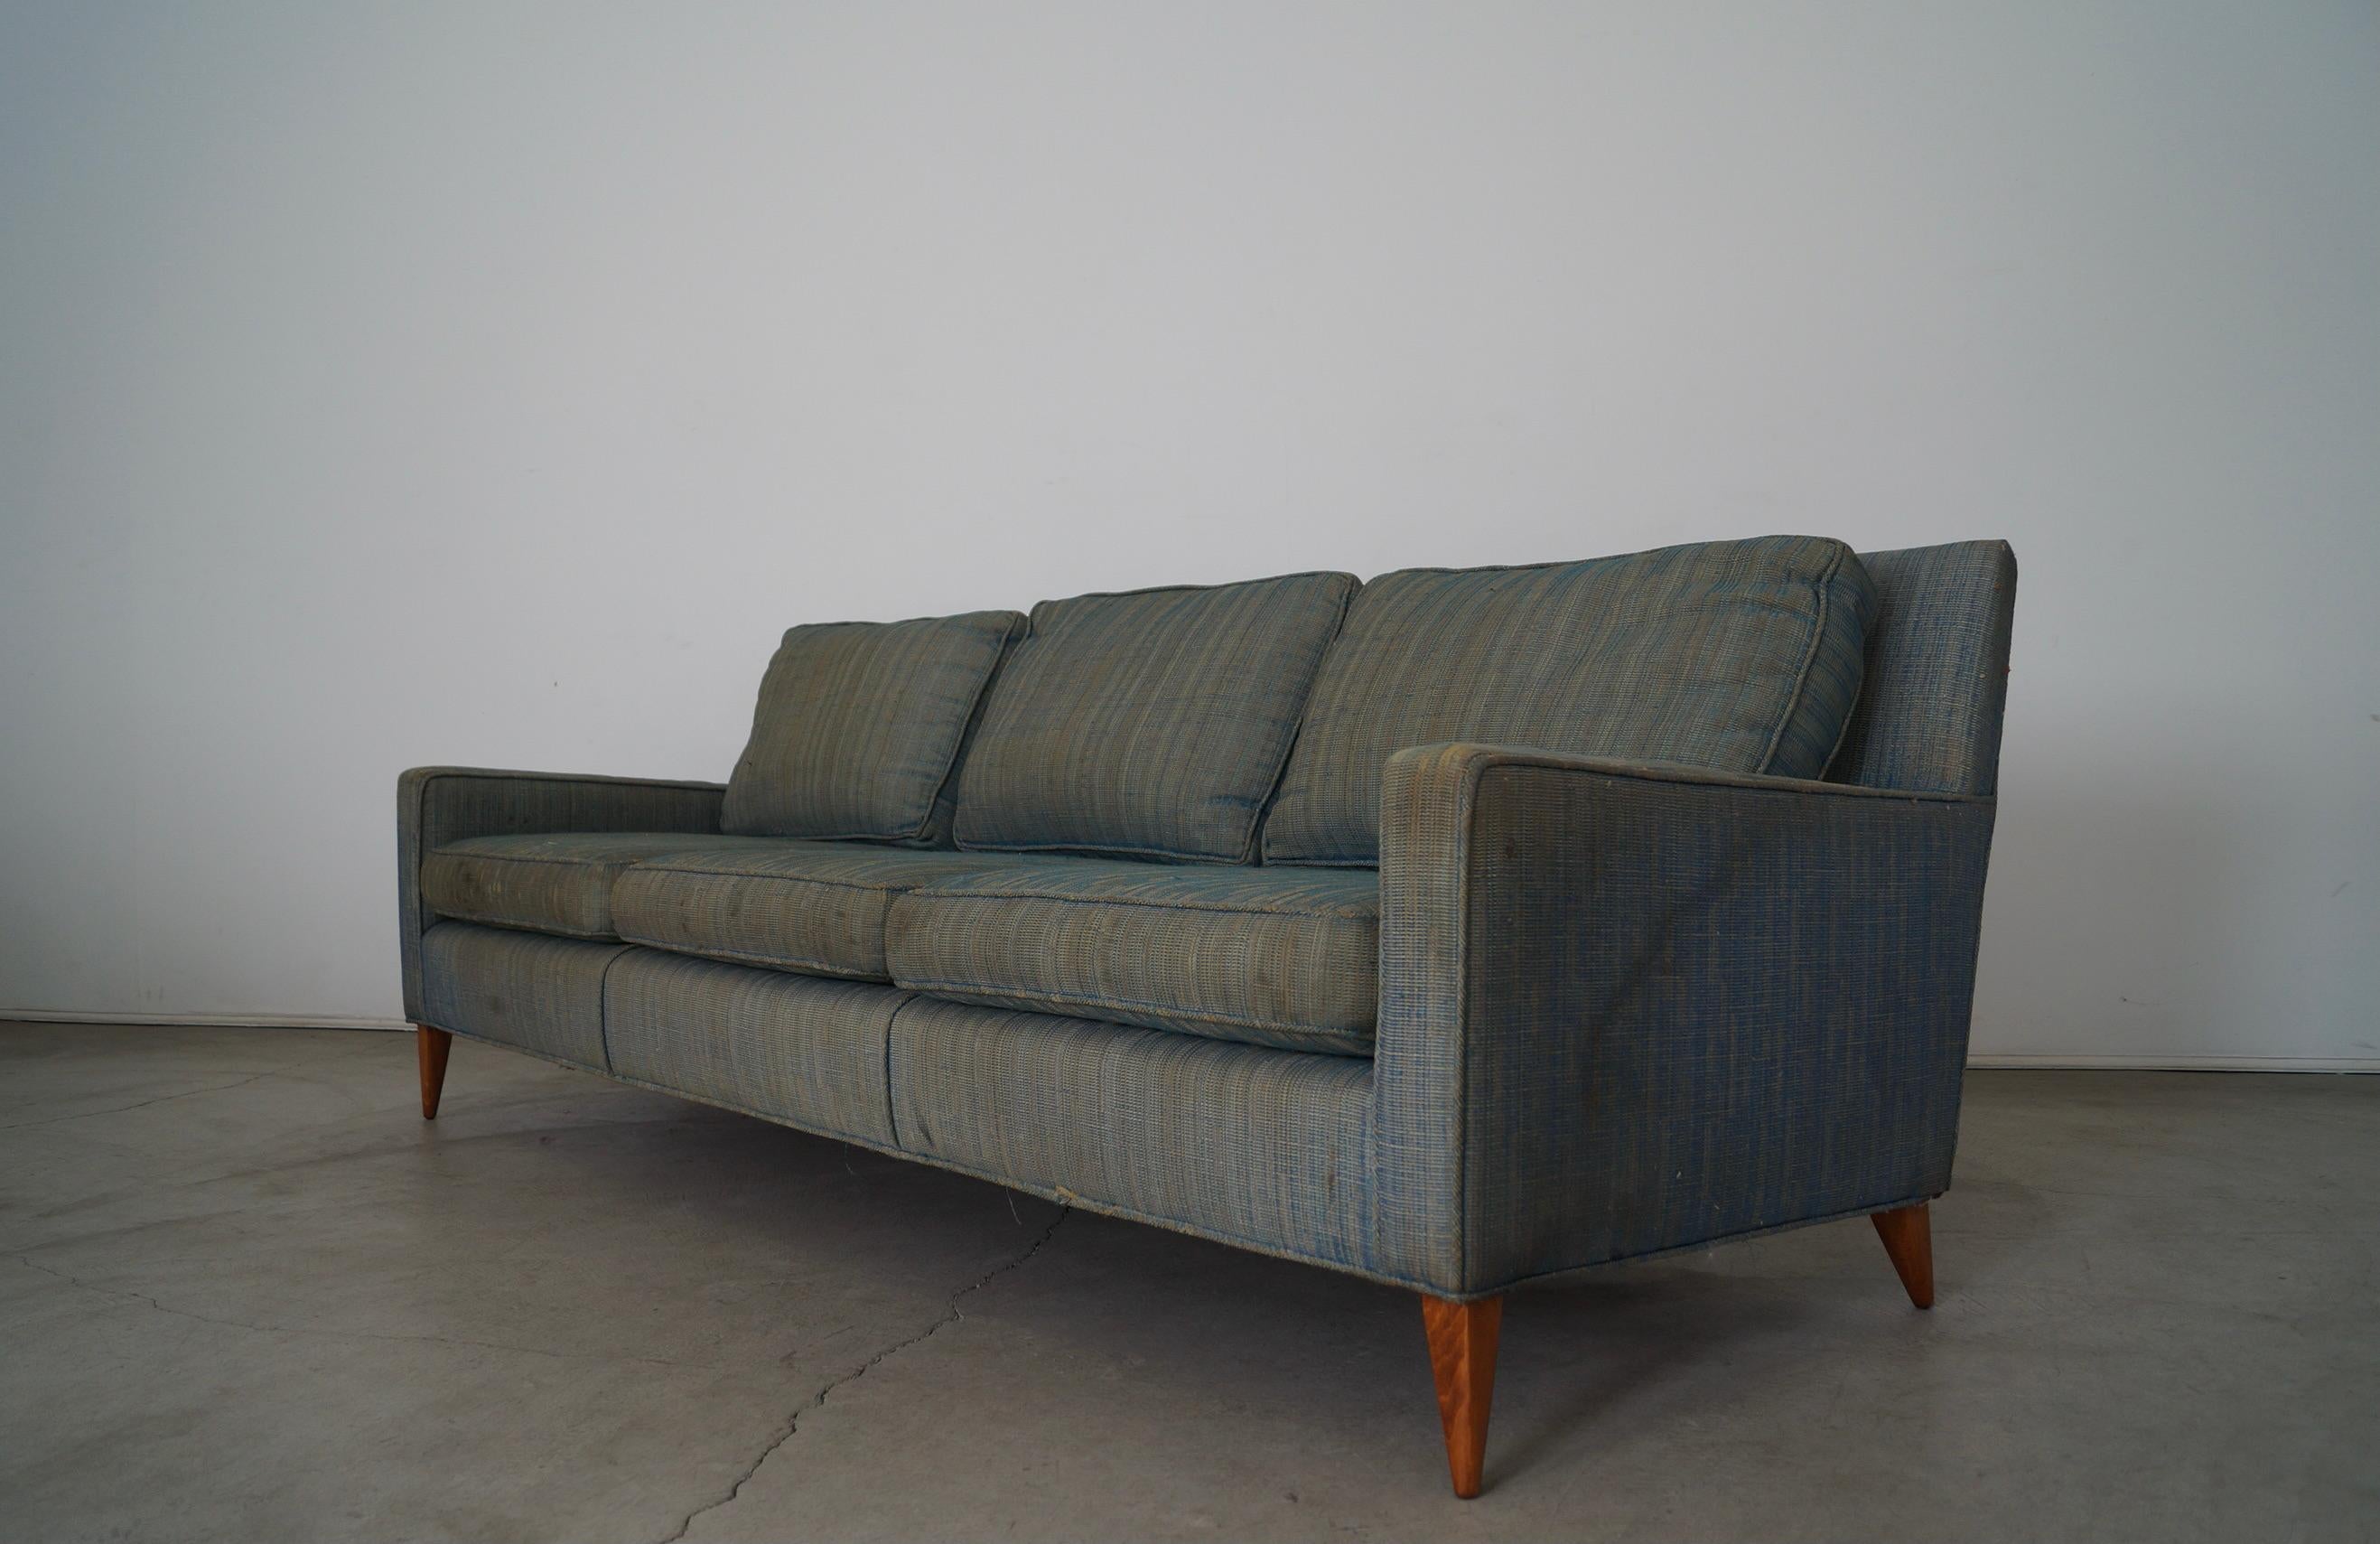 1950's Mid-Century Modern Paul McCobb Sofa In Distressed Condition For Sale In Burbank, CA